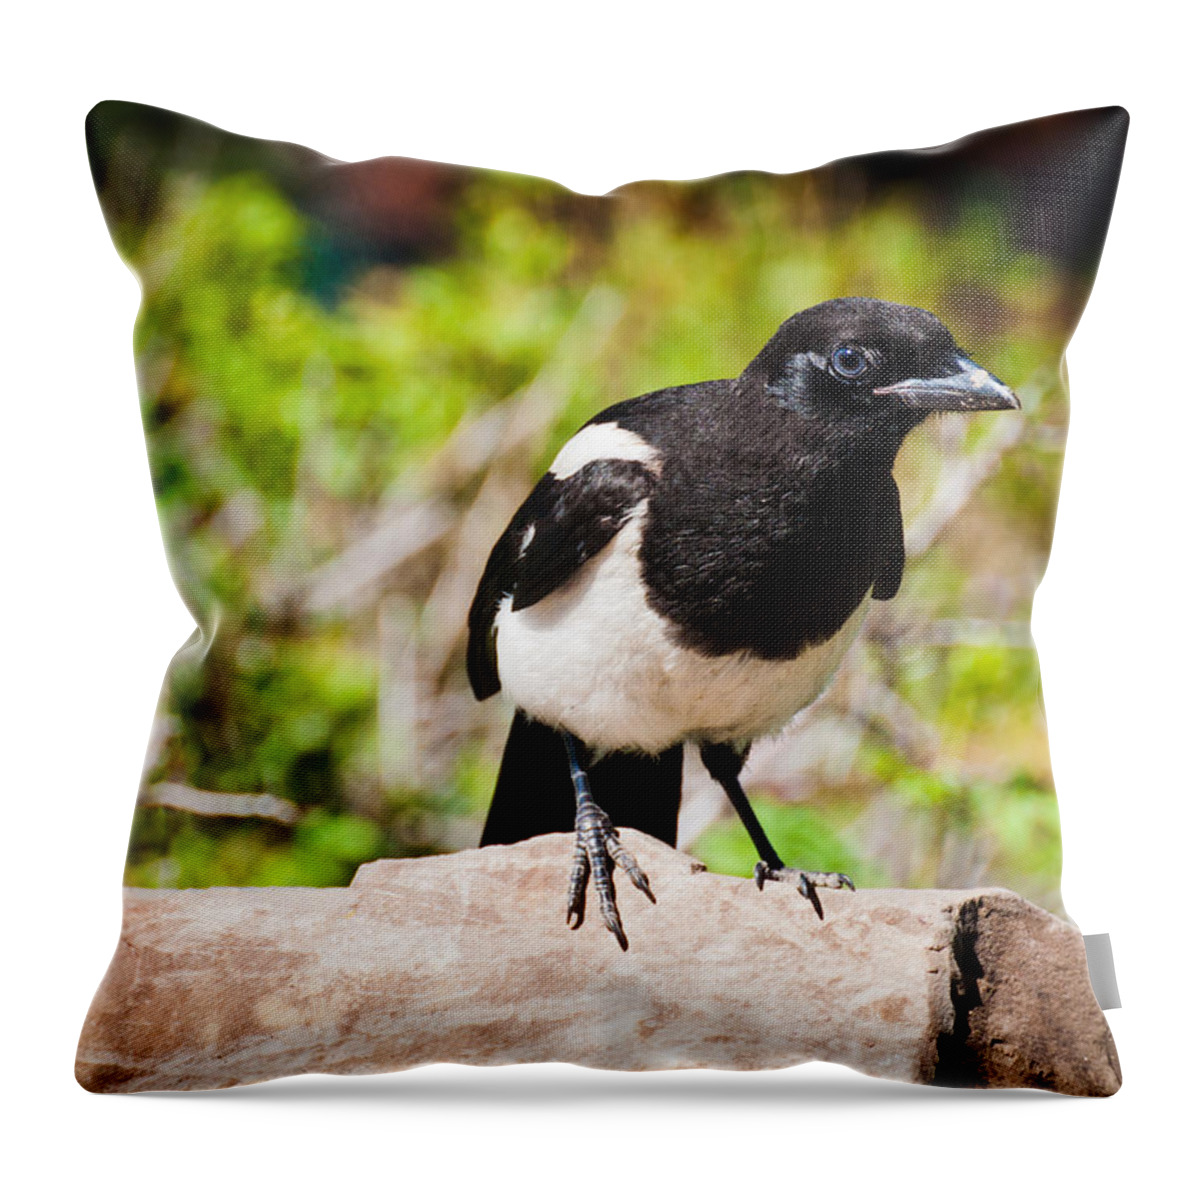 Magpie Throw Pillow featuring the photograph Mr. Magpie by Cheryl Baxter